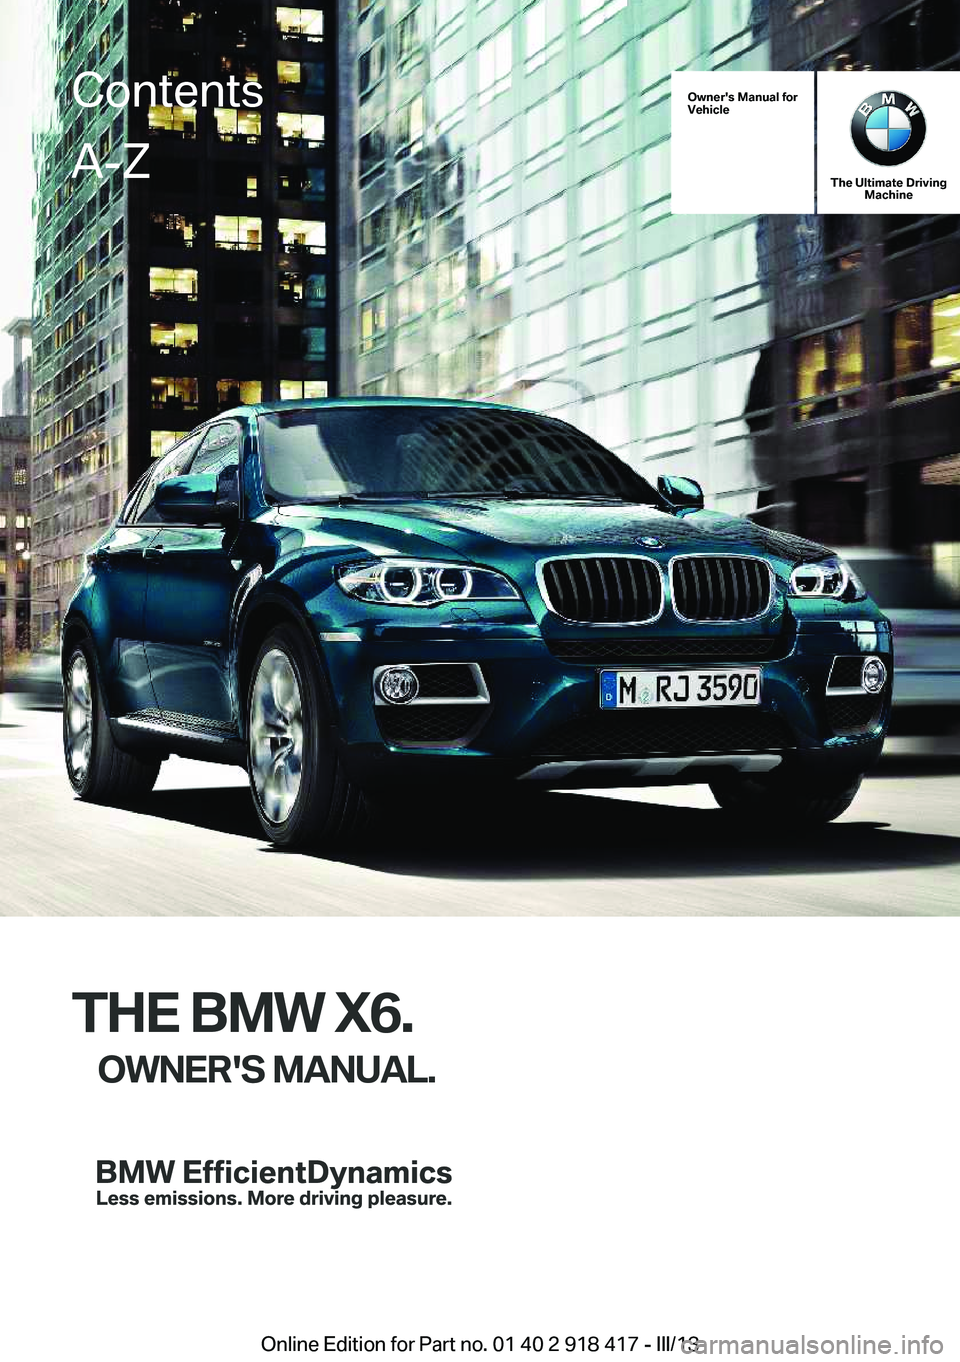 BMW X6 XDRIVE 50I 2013  Owners Manual Owner's Manual for
Vehicle
The Ultimate Driving Machine
THE BMW X6.
OWNER'S MANUAL.
ContentsA-Z
Online Edition for Part no. 01 40 2 918 417 - III/13   